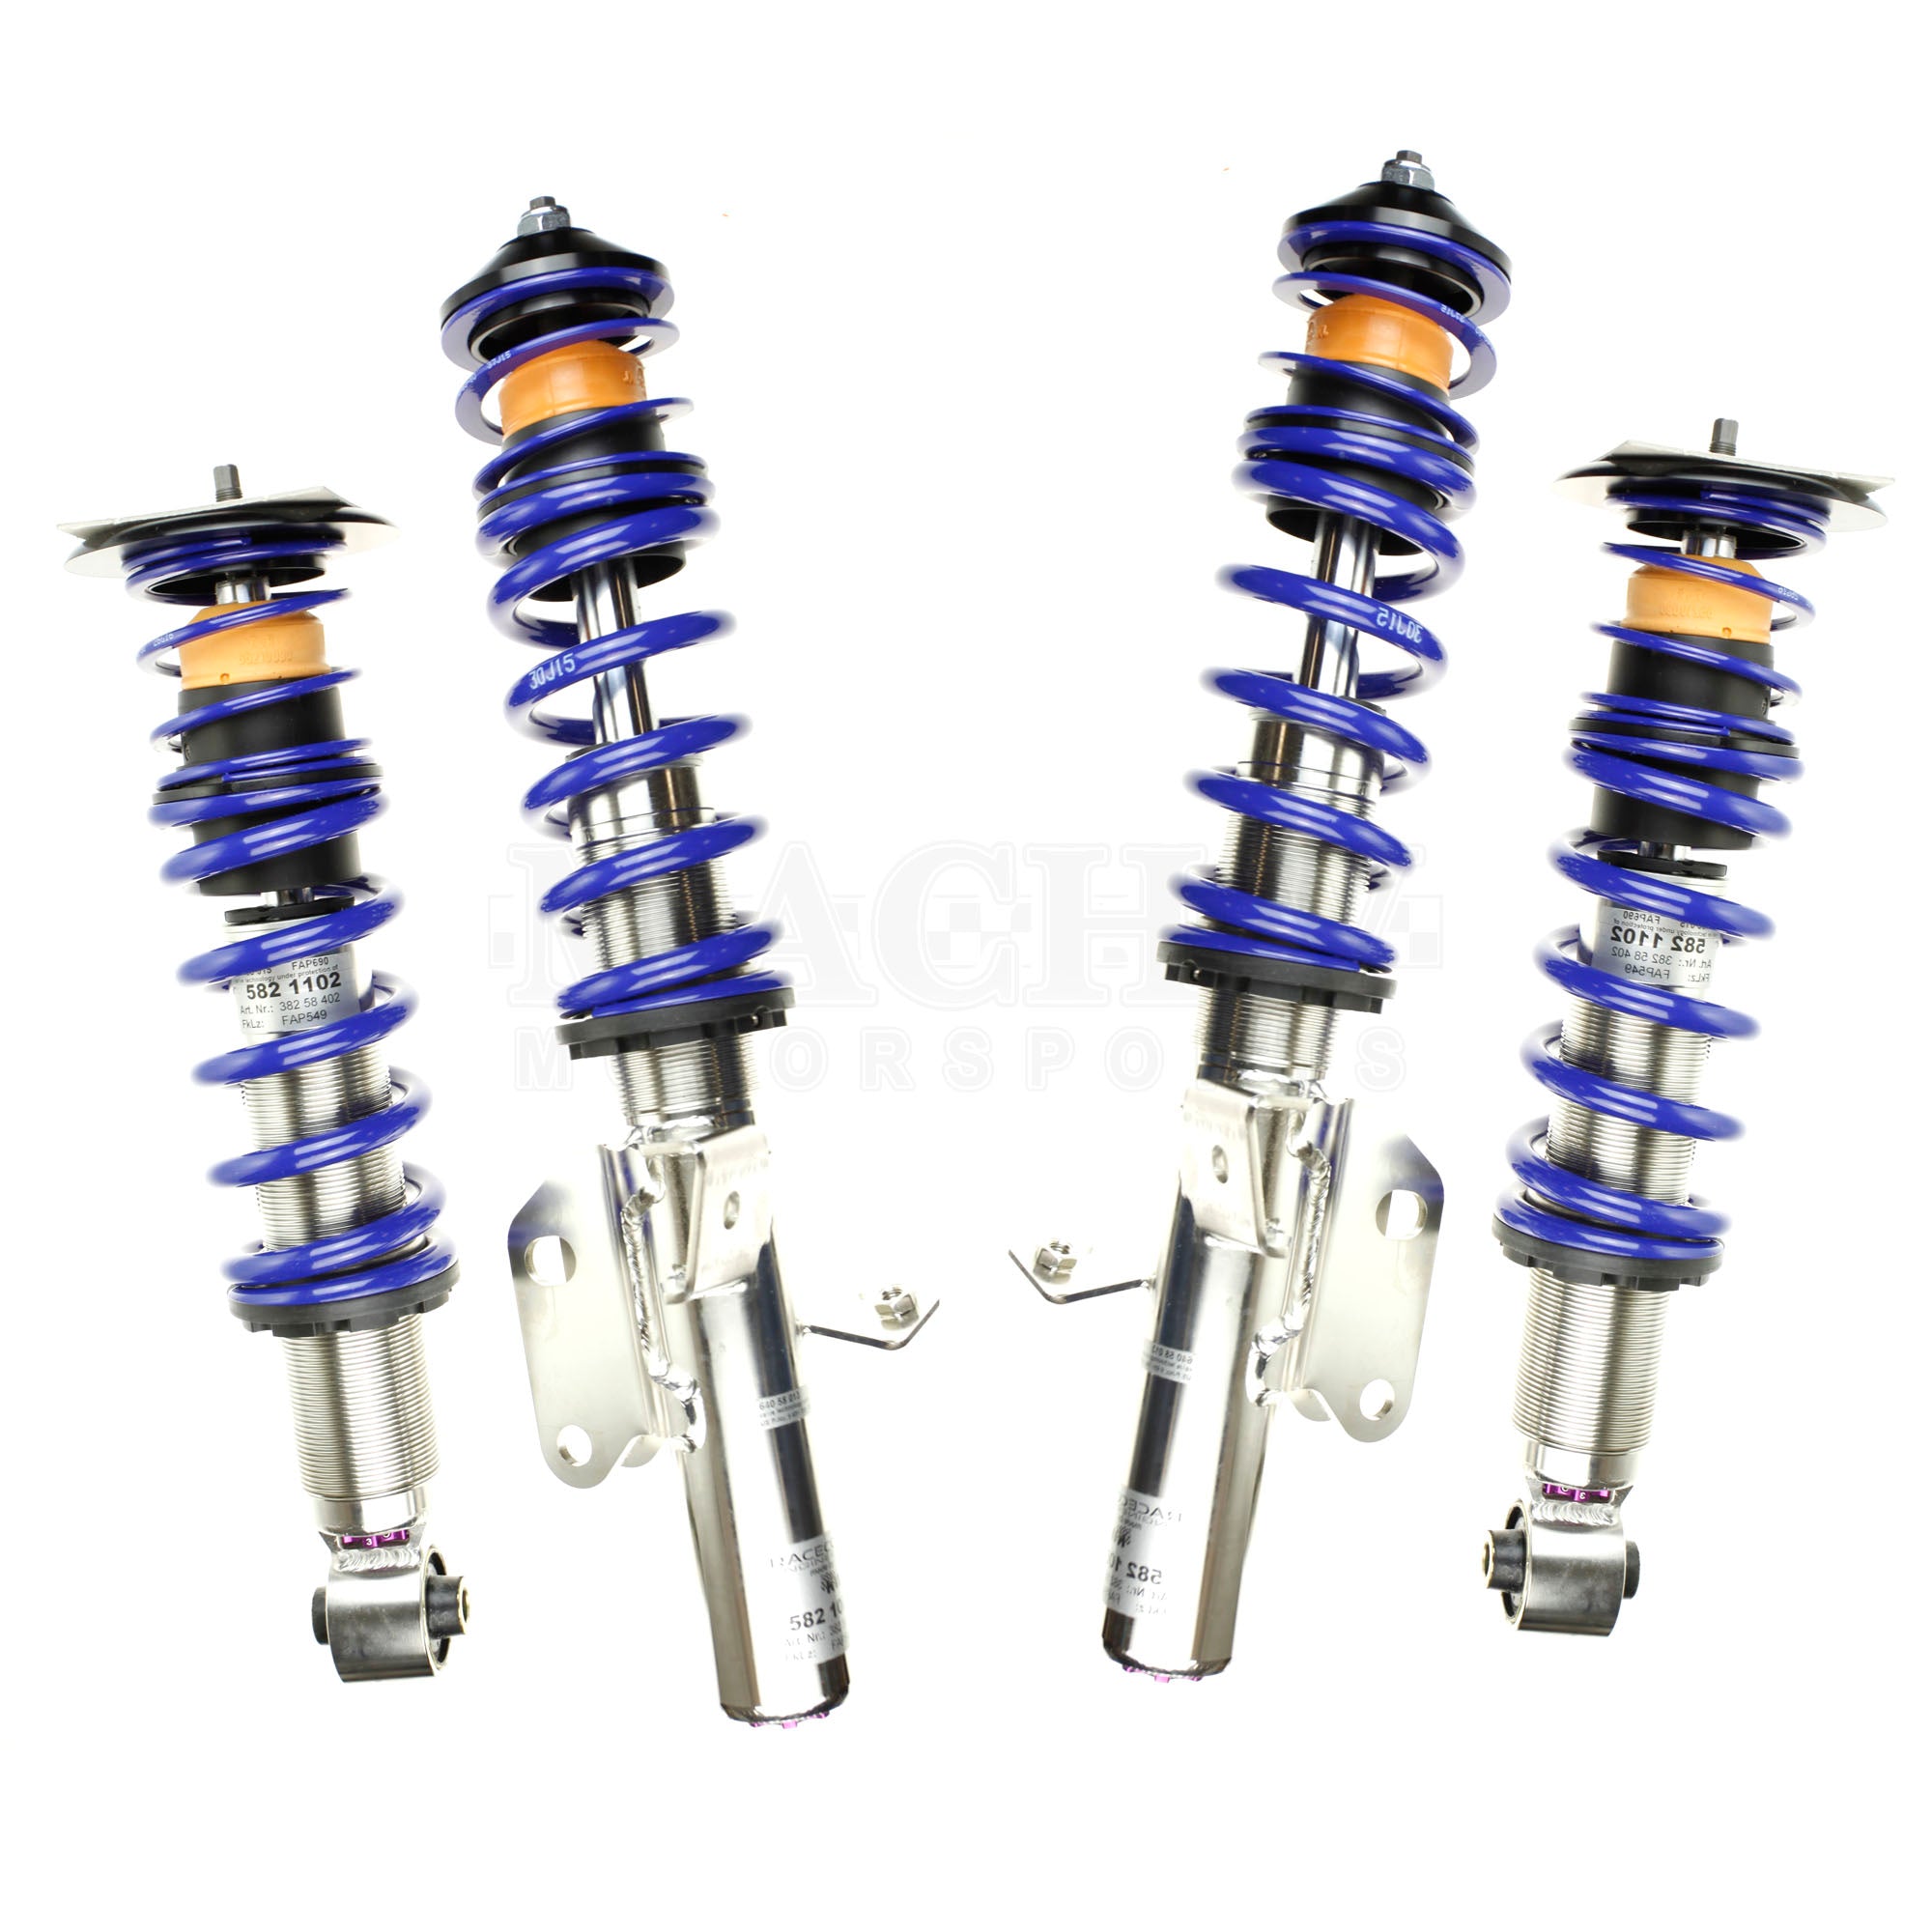 Racecomp Engineering Tarmac 2 Coilovers 2013+ BRZ/FR-S/86